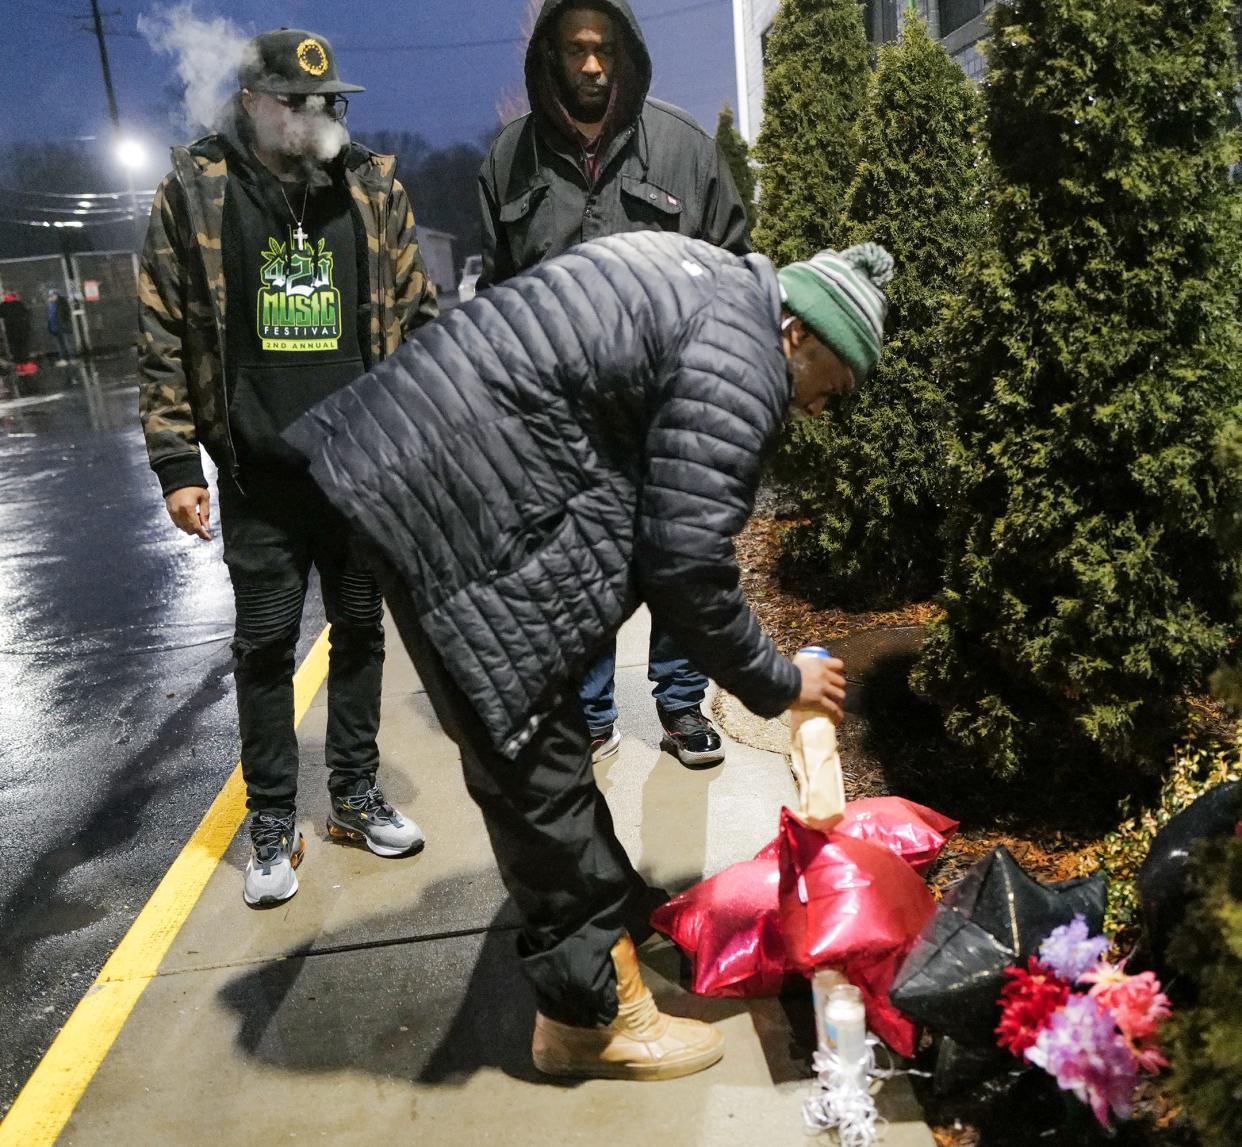 Mourners for Curshawn Terrell, pour alcholic beverages over the start of a remembrance memorial outside of his recording studio 51 Sessions on Tuesday, Jan. 3, 2023. Terrell, also known as Kaz Drumatic, was shot and killed on Dec. 31, 2022.